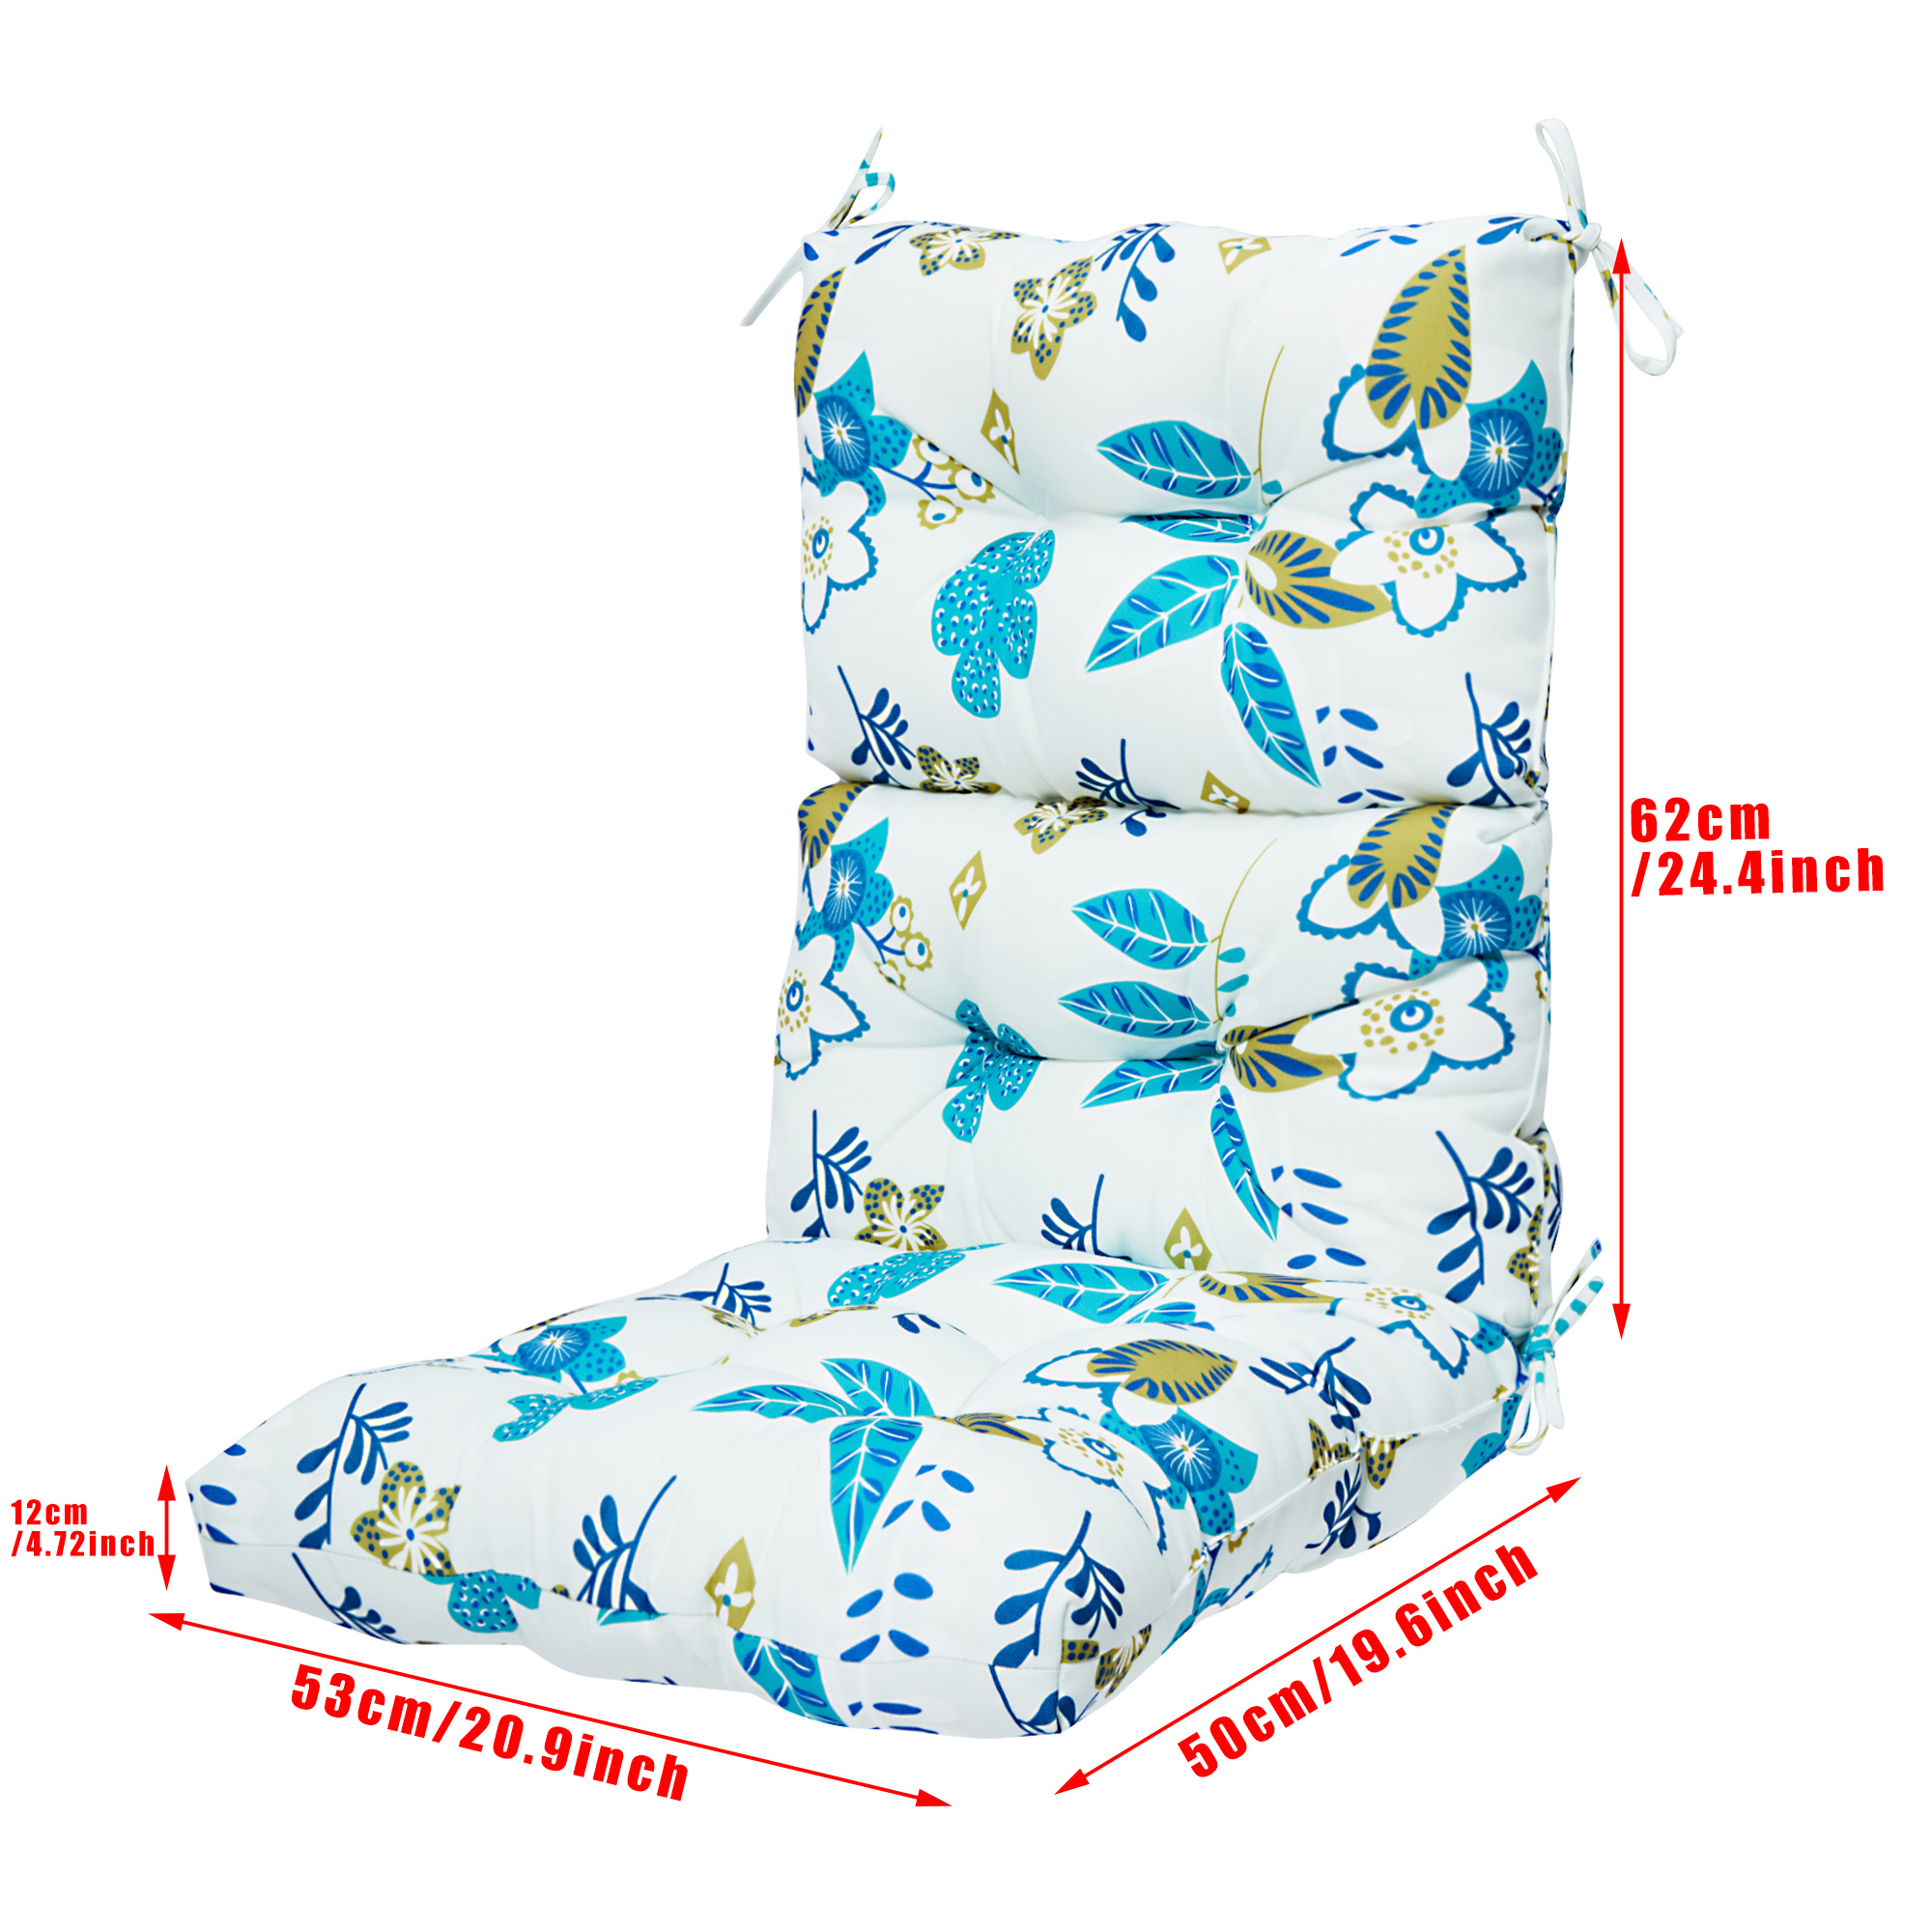 2pcs Outdoor High Back Chair Cushion Universal Non-Slip Tatami Cushion Sofa Chair Cushion, Floral Outdoor High Back Chair Cushion for Home Decor, 44" x 21" x 5" - image 3 of 7